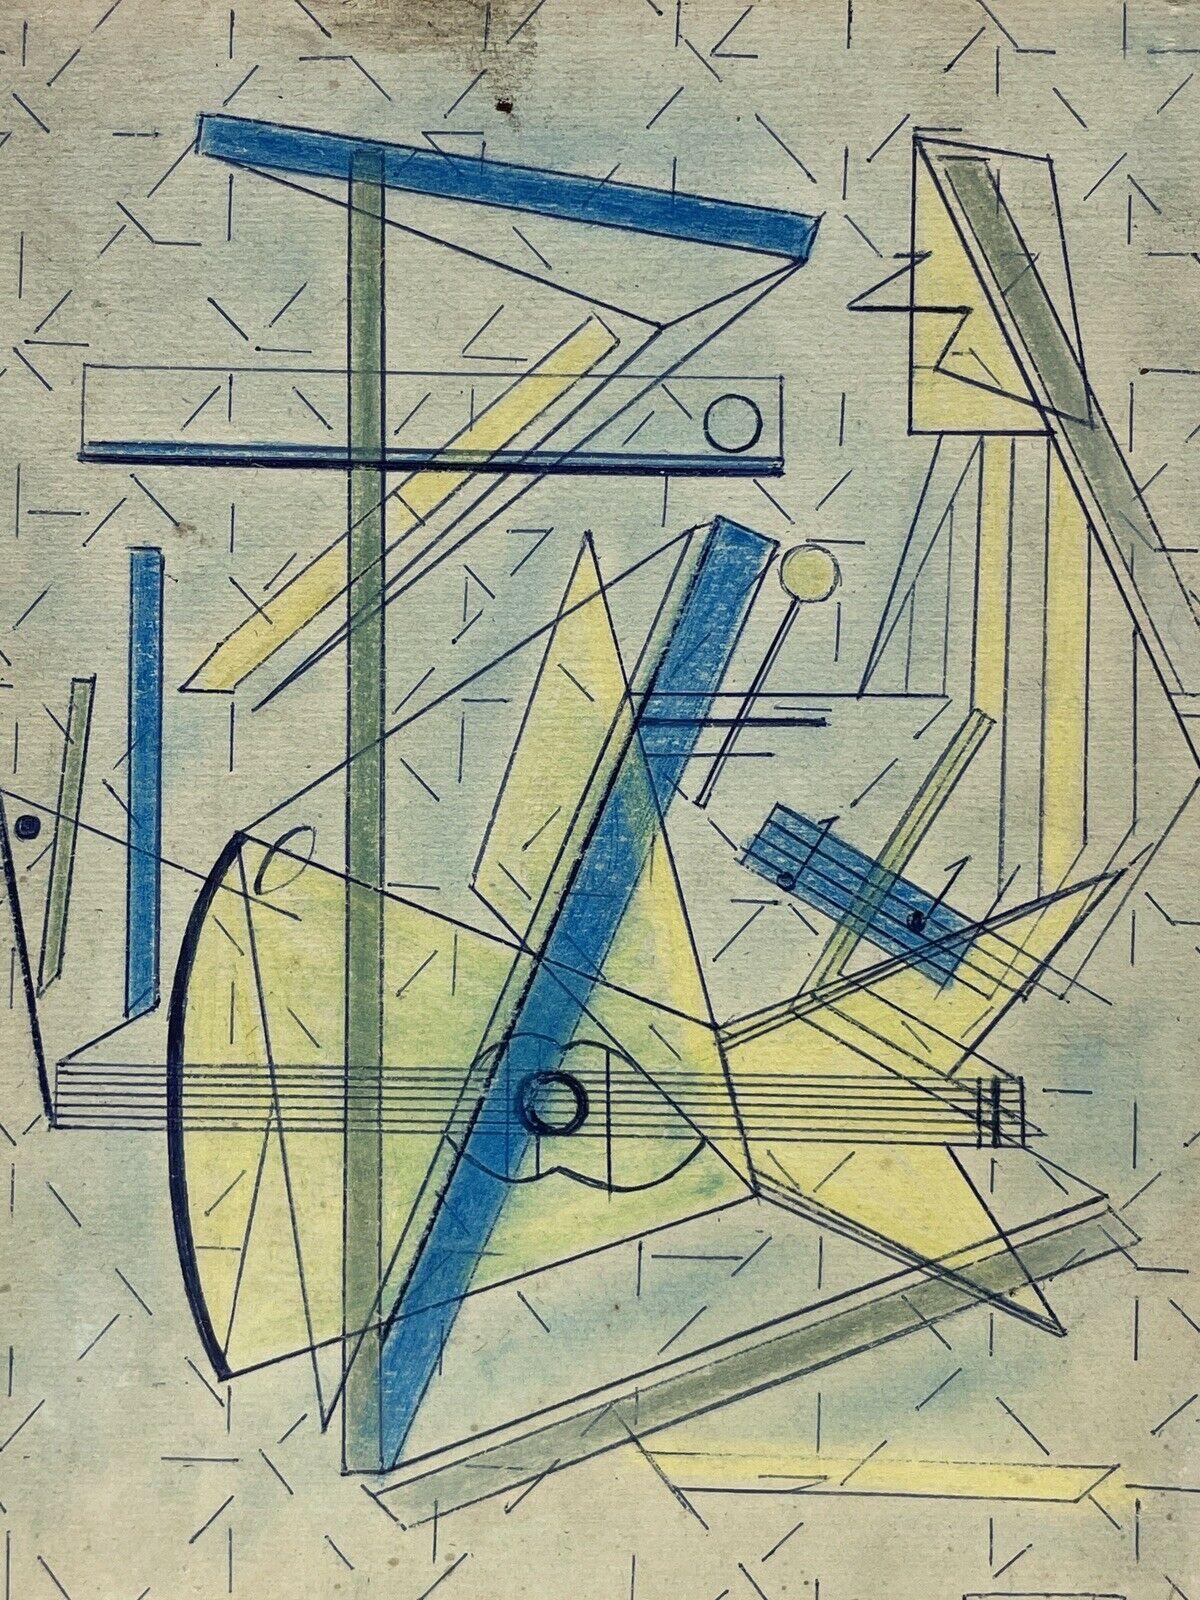 Artist/ School/ Date:
French School, dated 1957, signed

Title:
geometric abstract composition

Medium & Size:
ink and watercolour on card, 12 x 9.25 inches, unframed

Condition:
overall very sound, though a few dirt smudges (mainly on the top